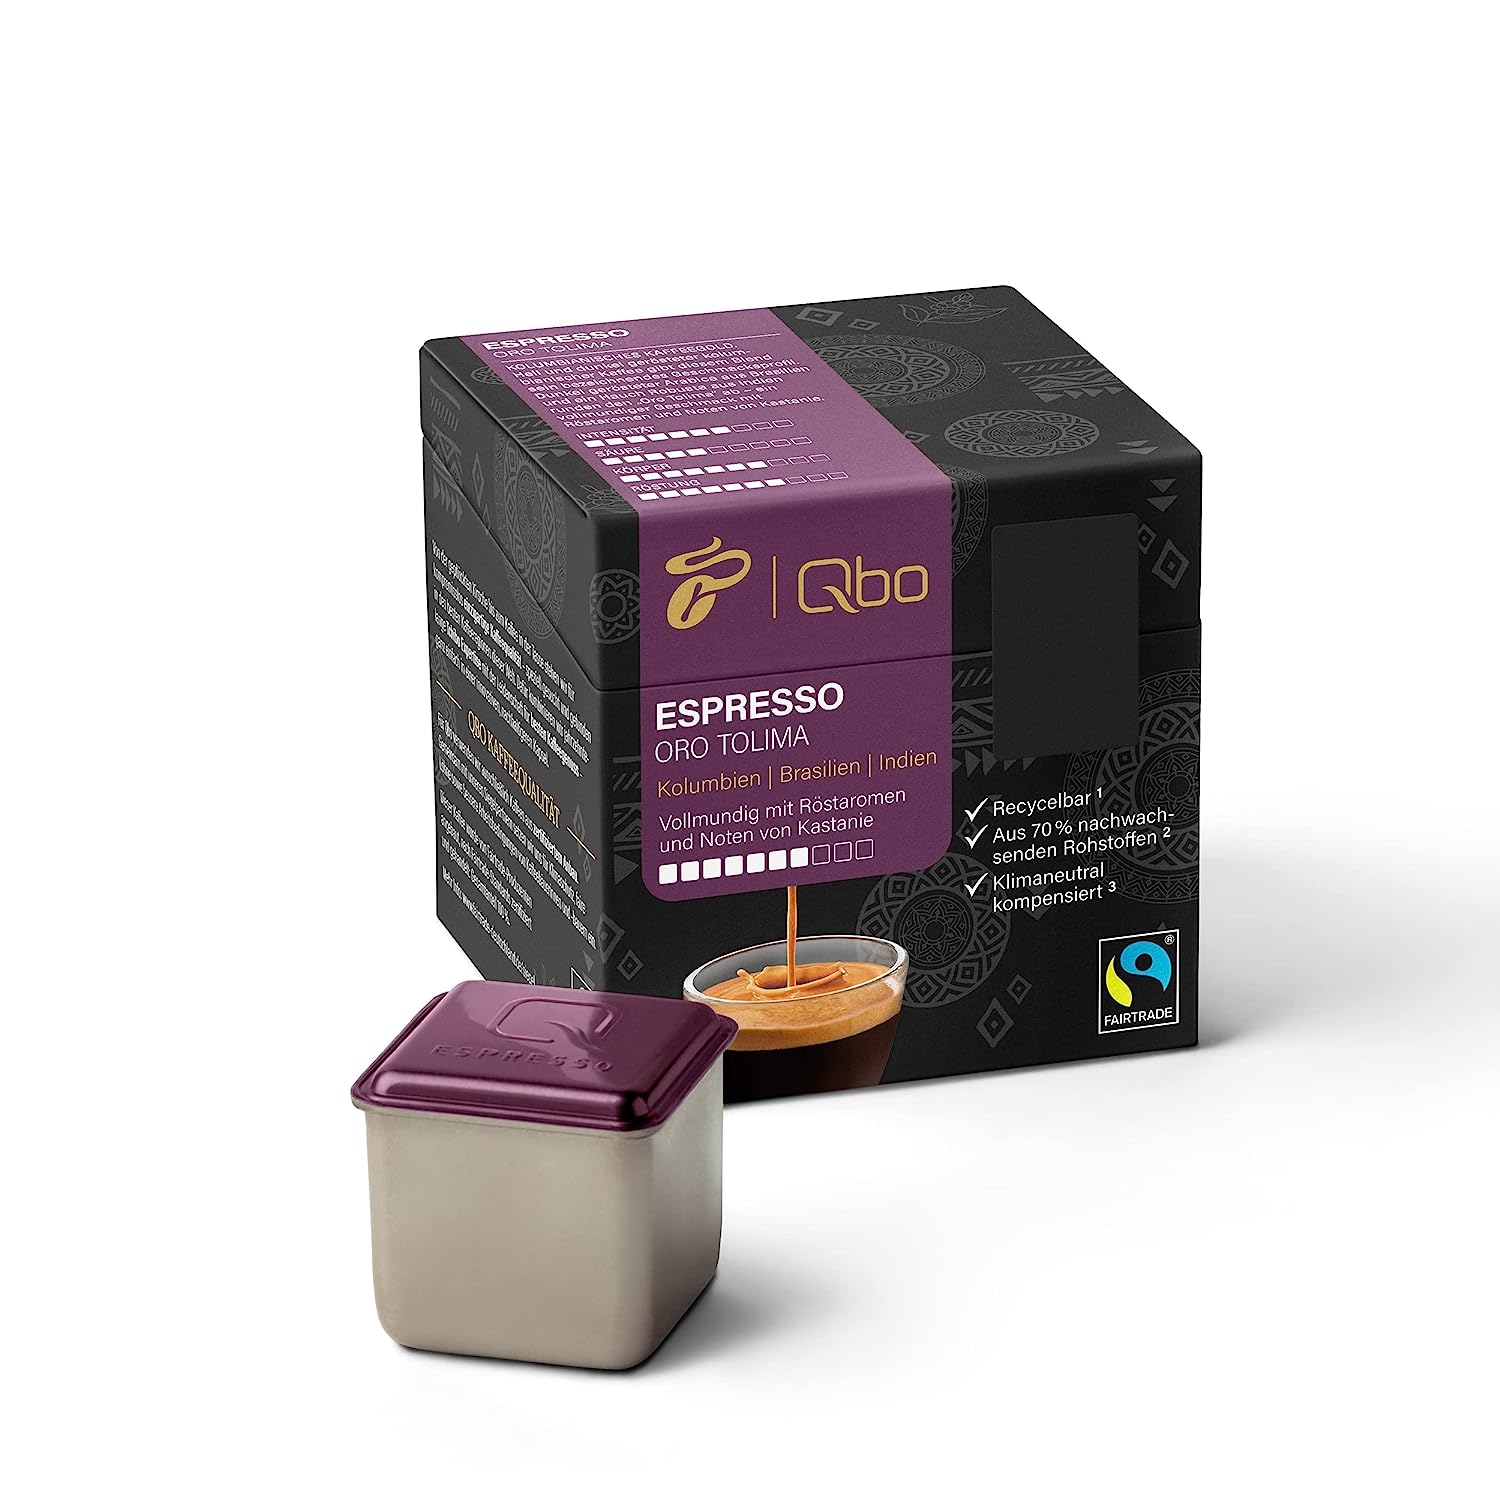 Tchibo qbo Espresso Oro Tolima Premium coffee capsules, 144 pieces - 18x8 capsules (espresso, intensity 7/10, full -bodied with roasted aromas), sustainable, from 70% renewable raw materials